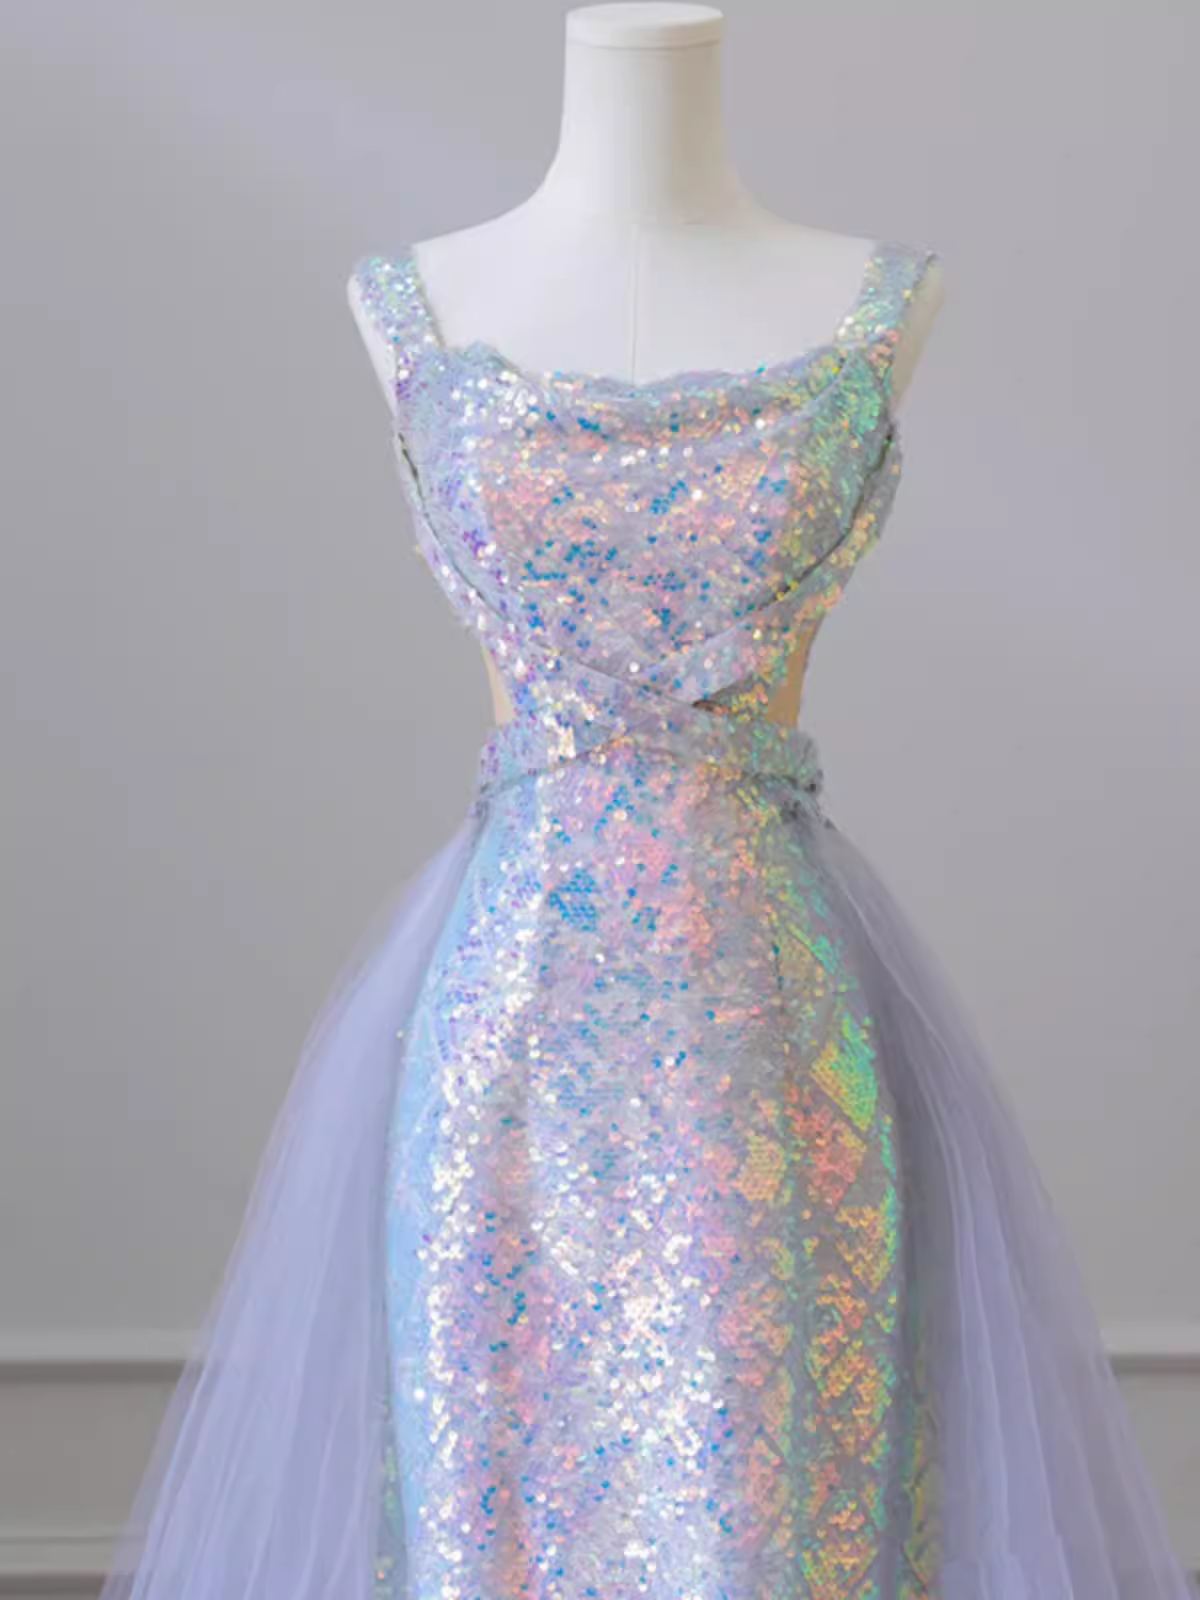 Sparkly Mermaid Straps Sequin Long Prom Dress B165